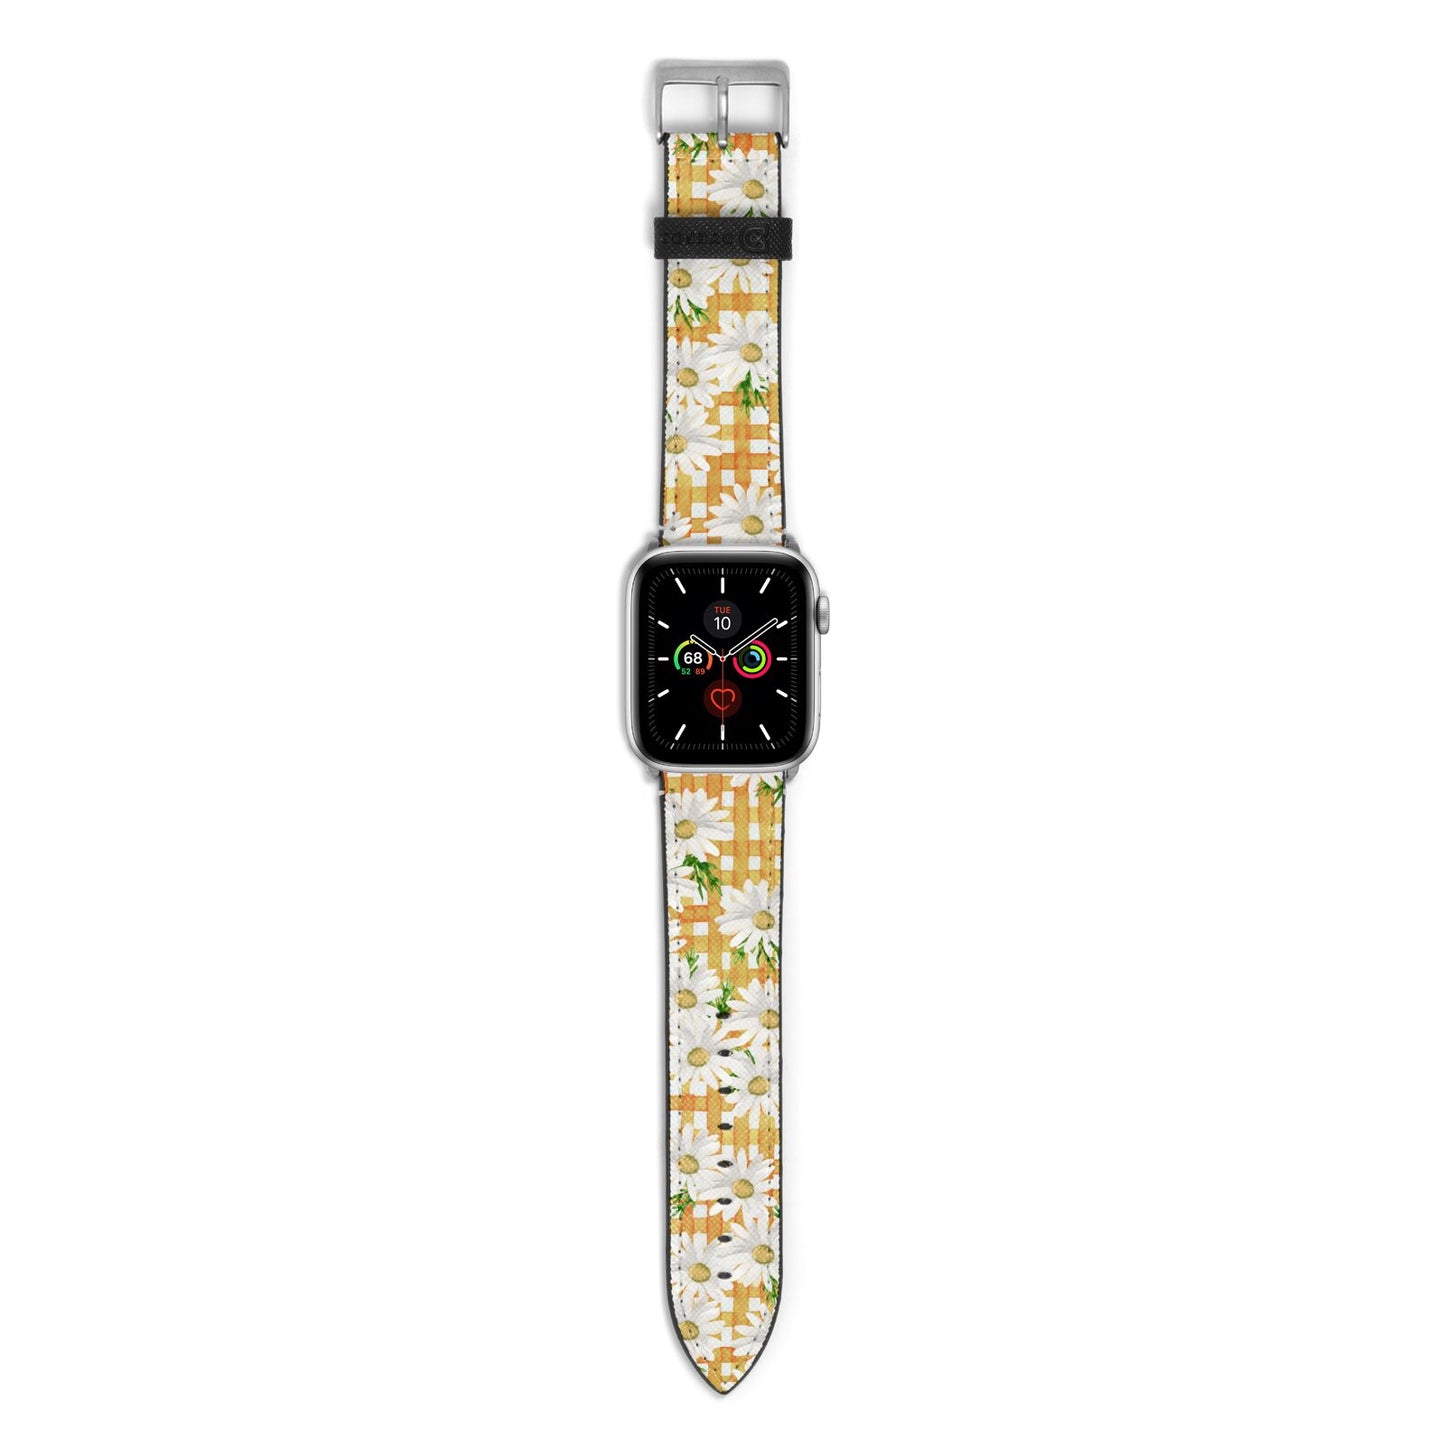 Checkered Daisy Apple Watch Strap with Silver Hardware